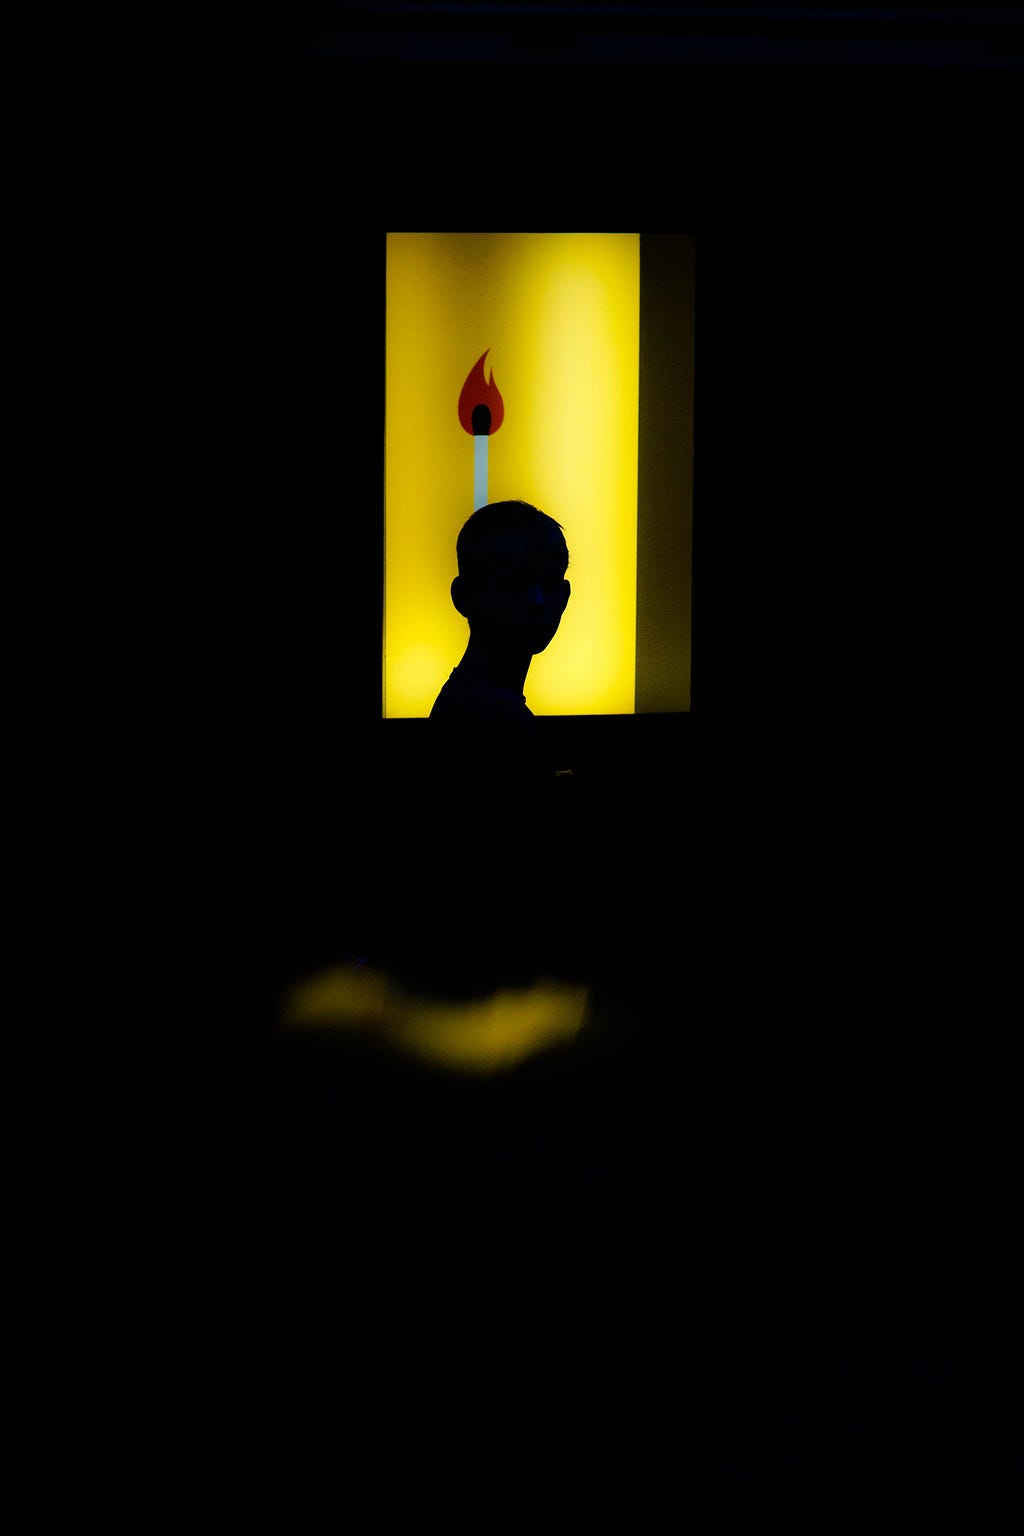 A silhouette of a person, backlit by an illuminated sign.